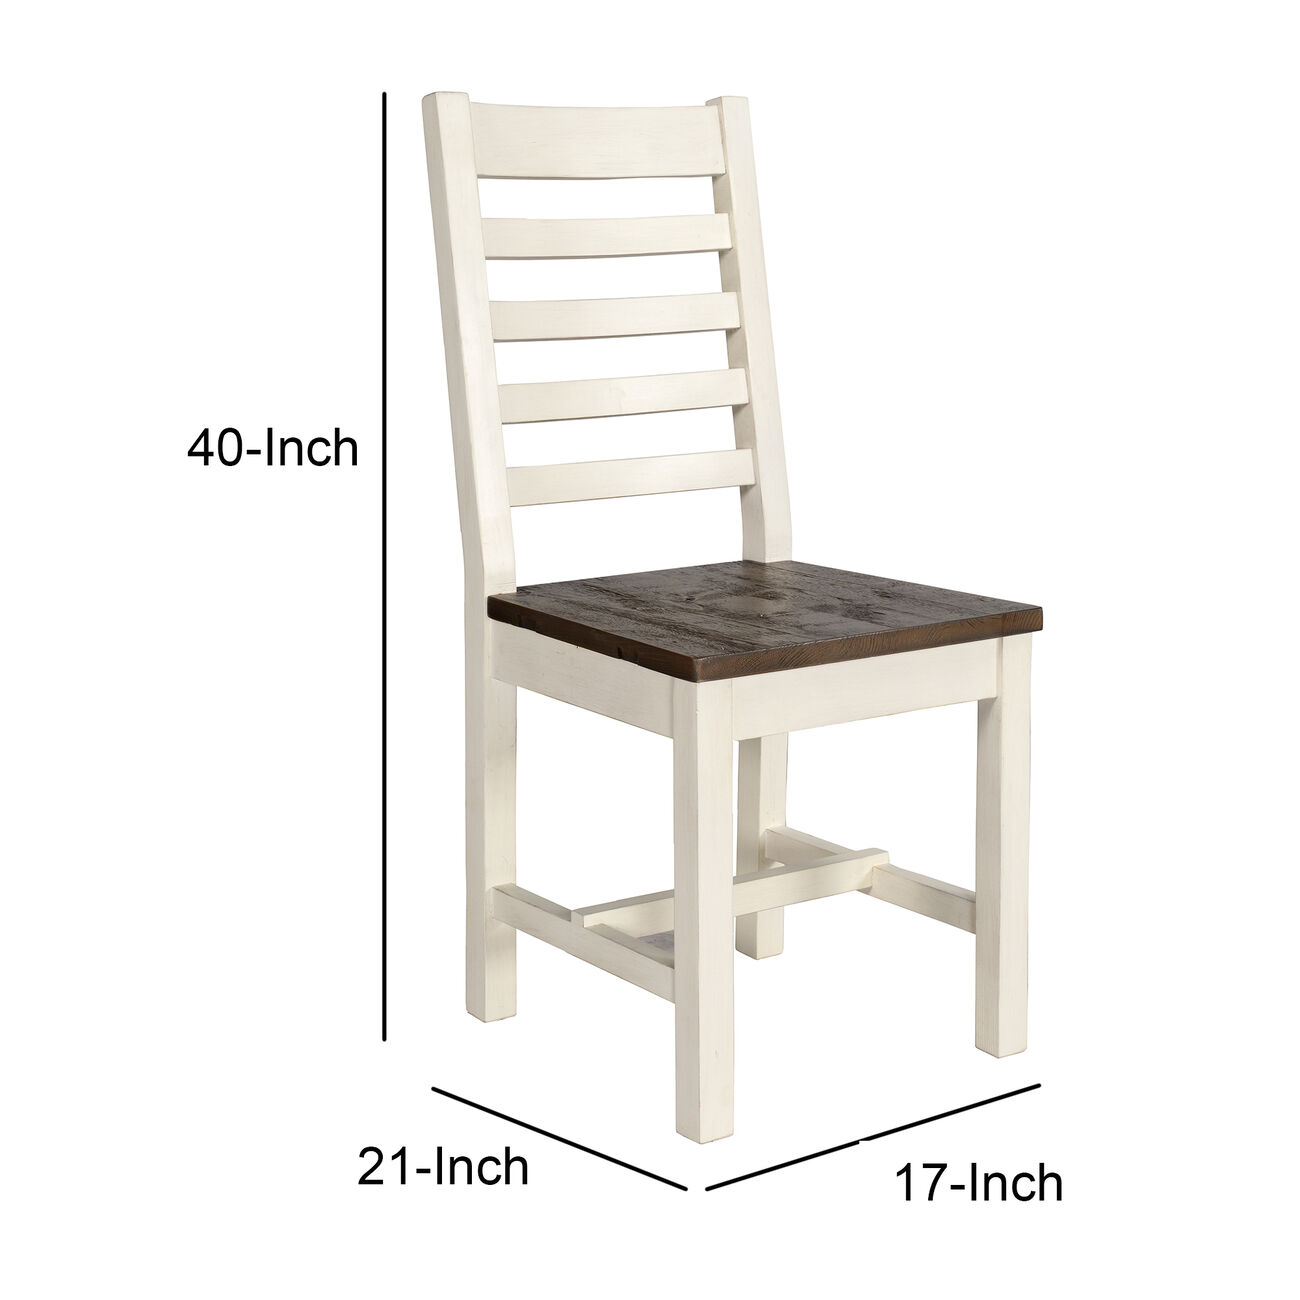 Farmhouse Wooden Dining Chair with Slatted Back, Set of 2, Brown and White